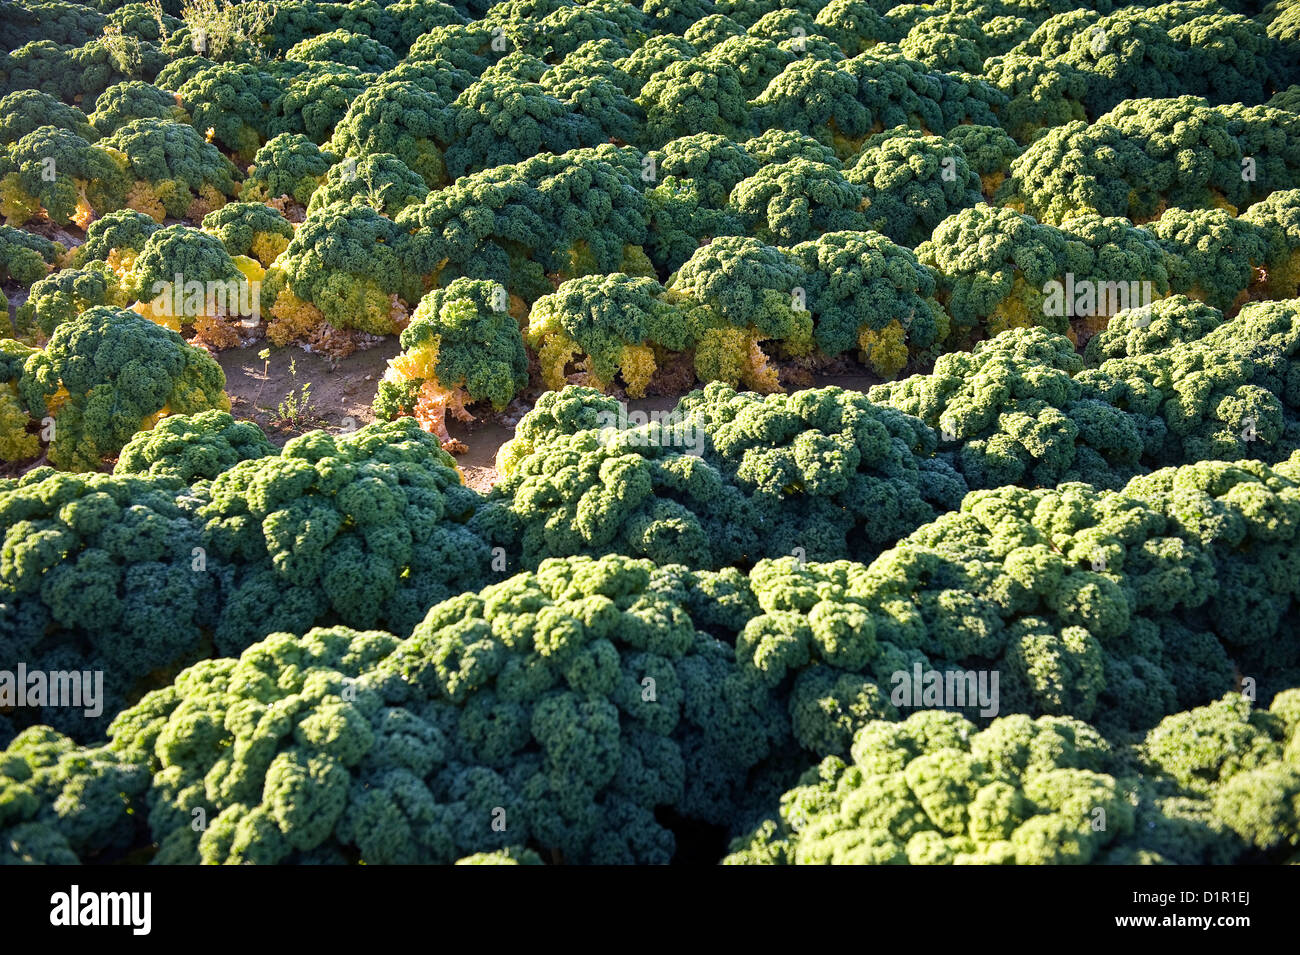 Brassica oleracea (Kale Kapitan) looking like an Amazonian rainforest viewed from the air. Stock Photo